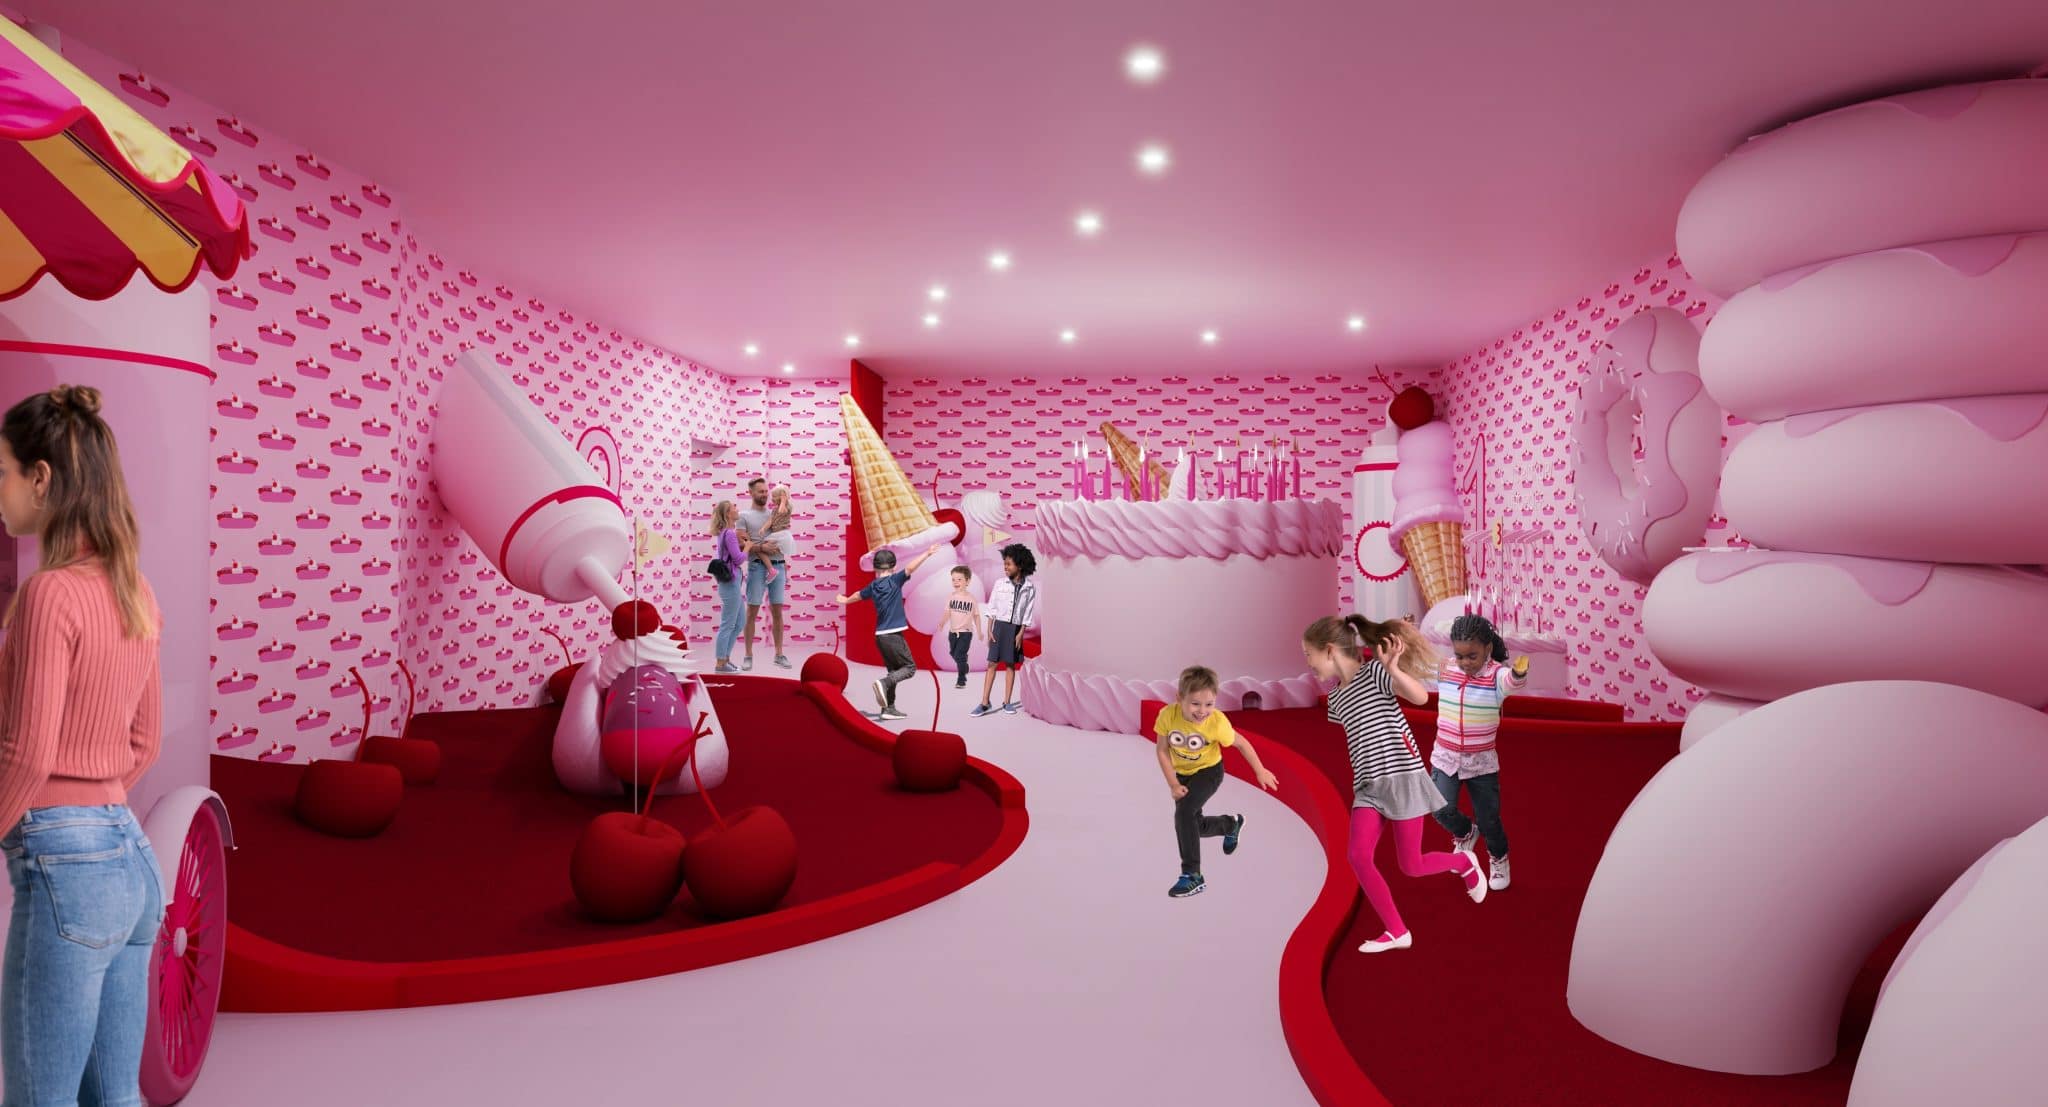 A rendering of the Chicago Museum of Ice Cream's putt-putt area